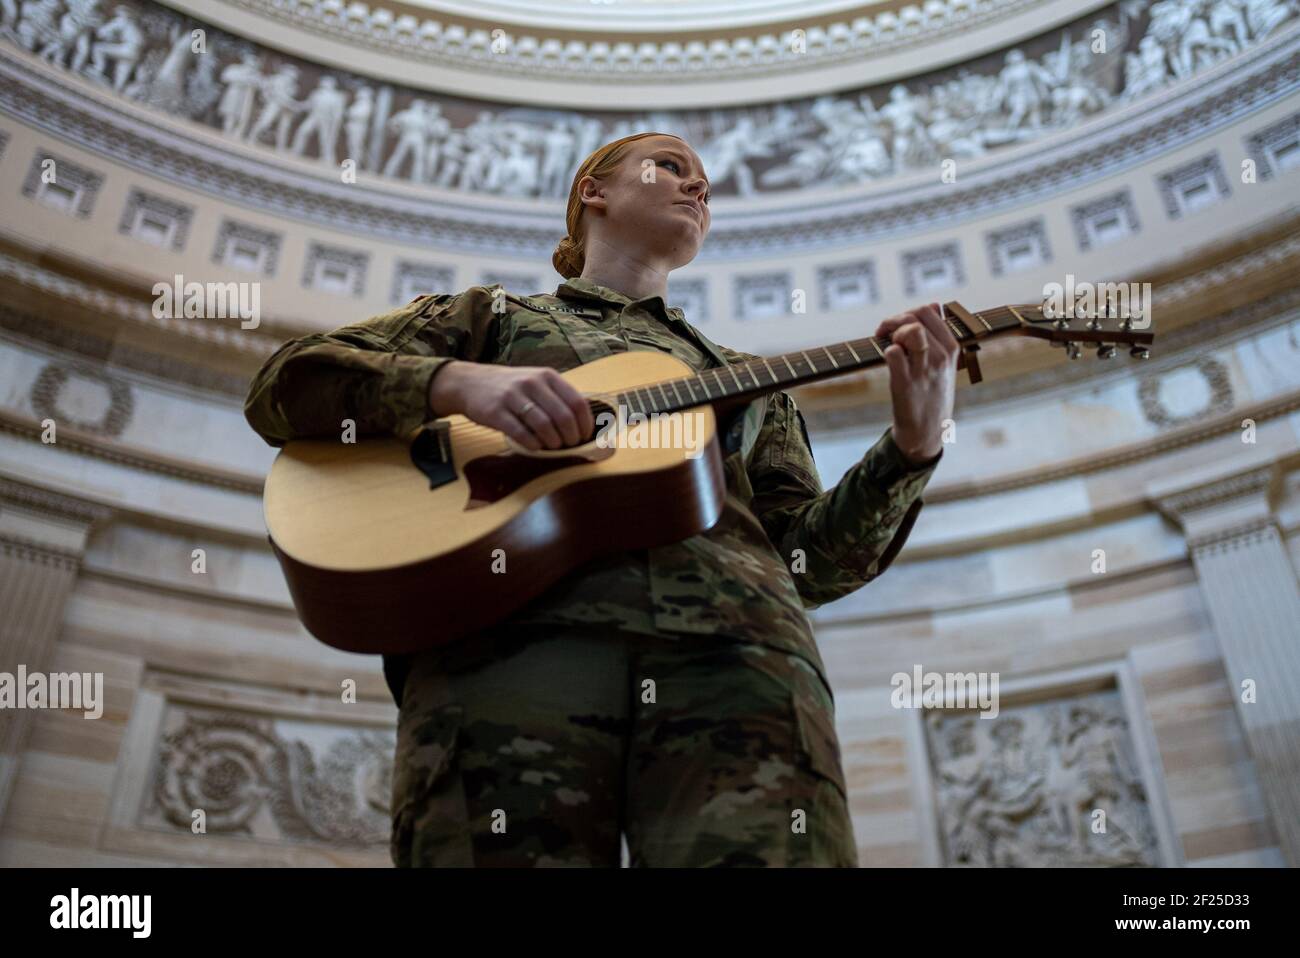 Washington, United States. 10th Mar, 2021. Army Sgt. Hannah Boulden with the  Michigan National Guard sings and plays guitar in the Rotunda of the U.S.  Capitol in Washington, DC on Wednesday, March